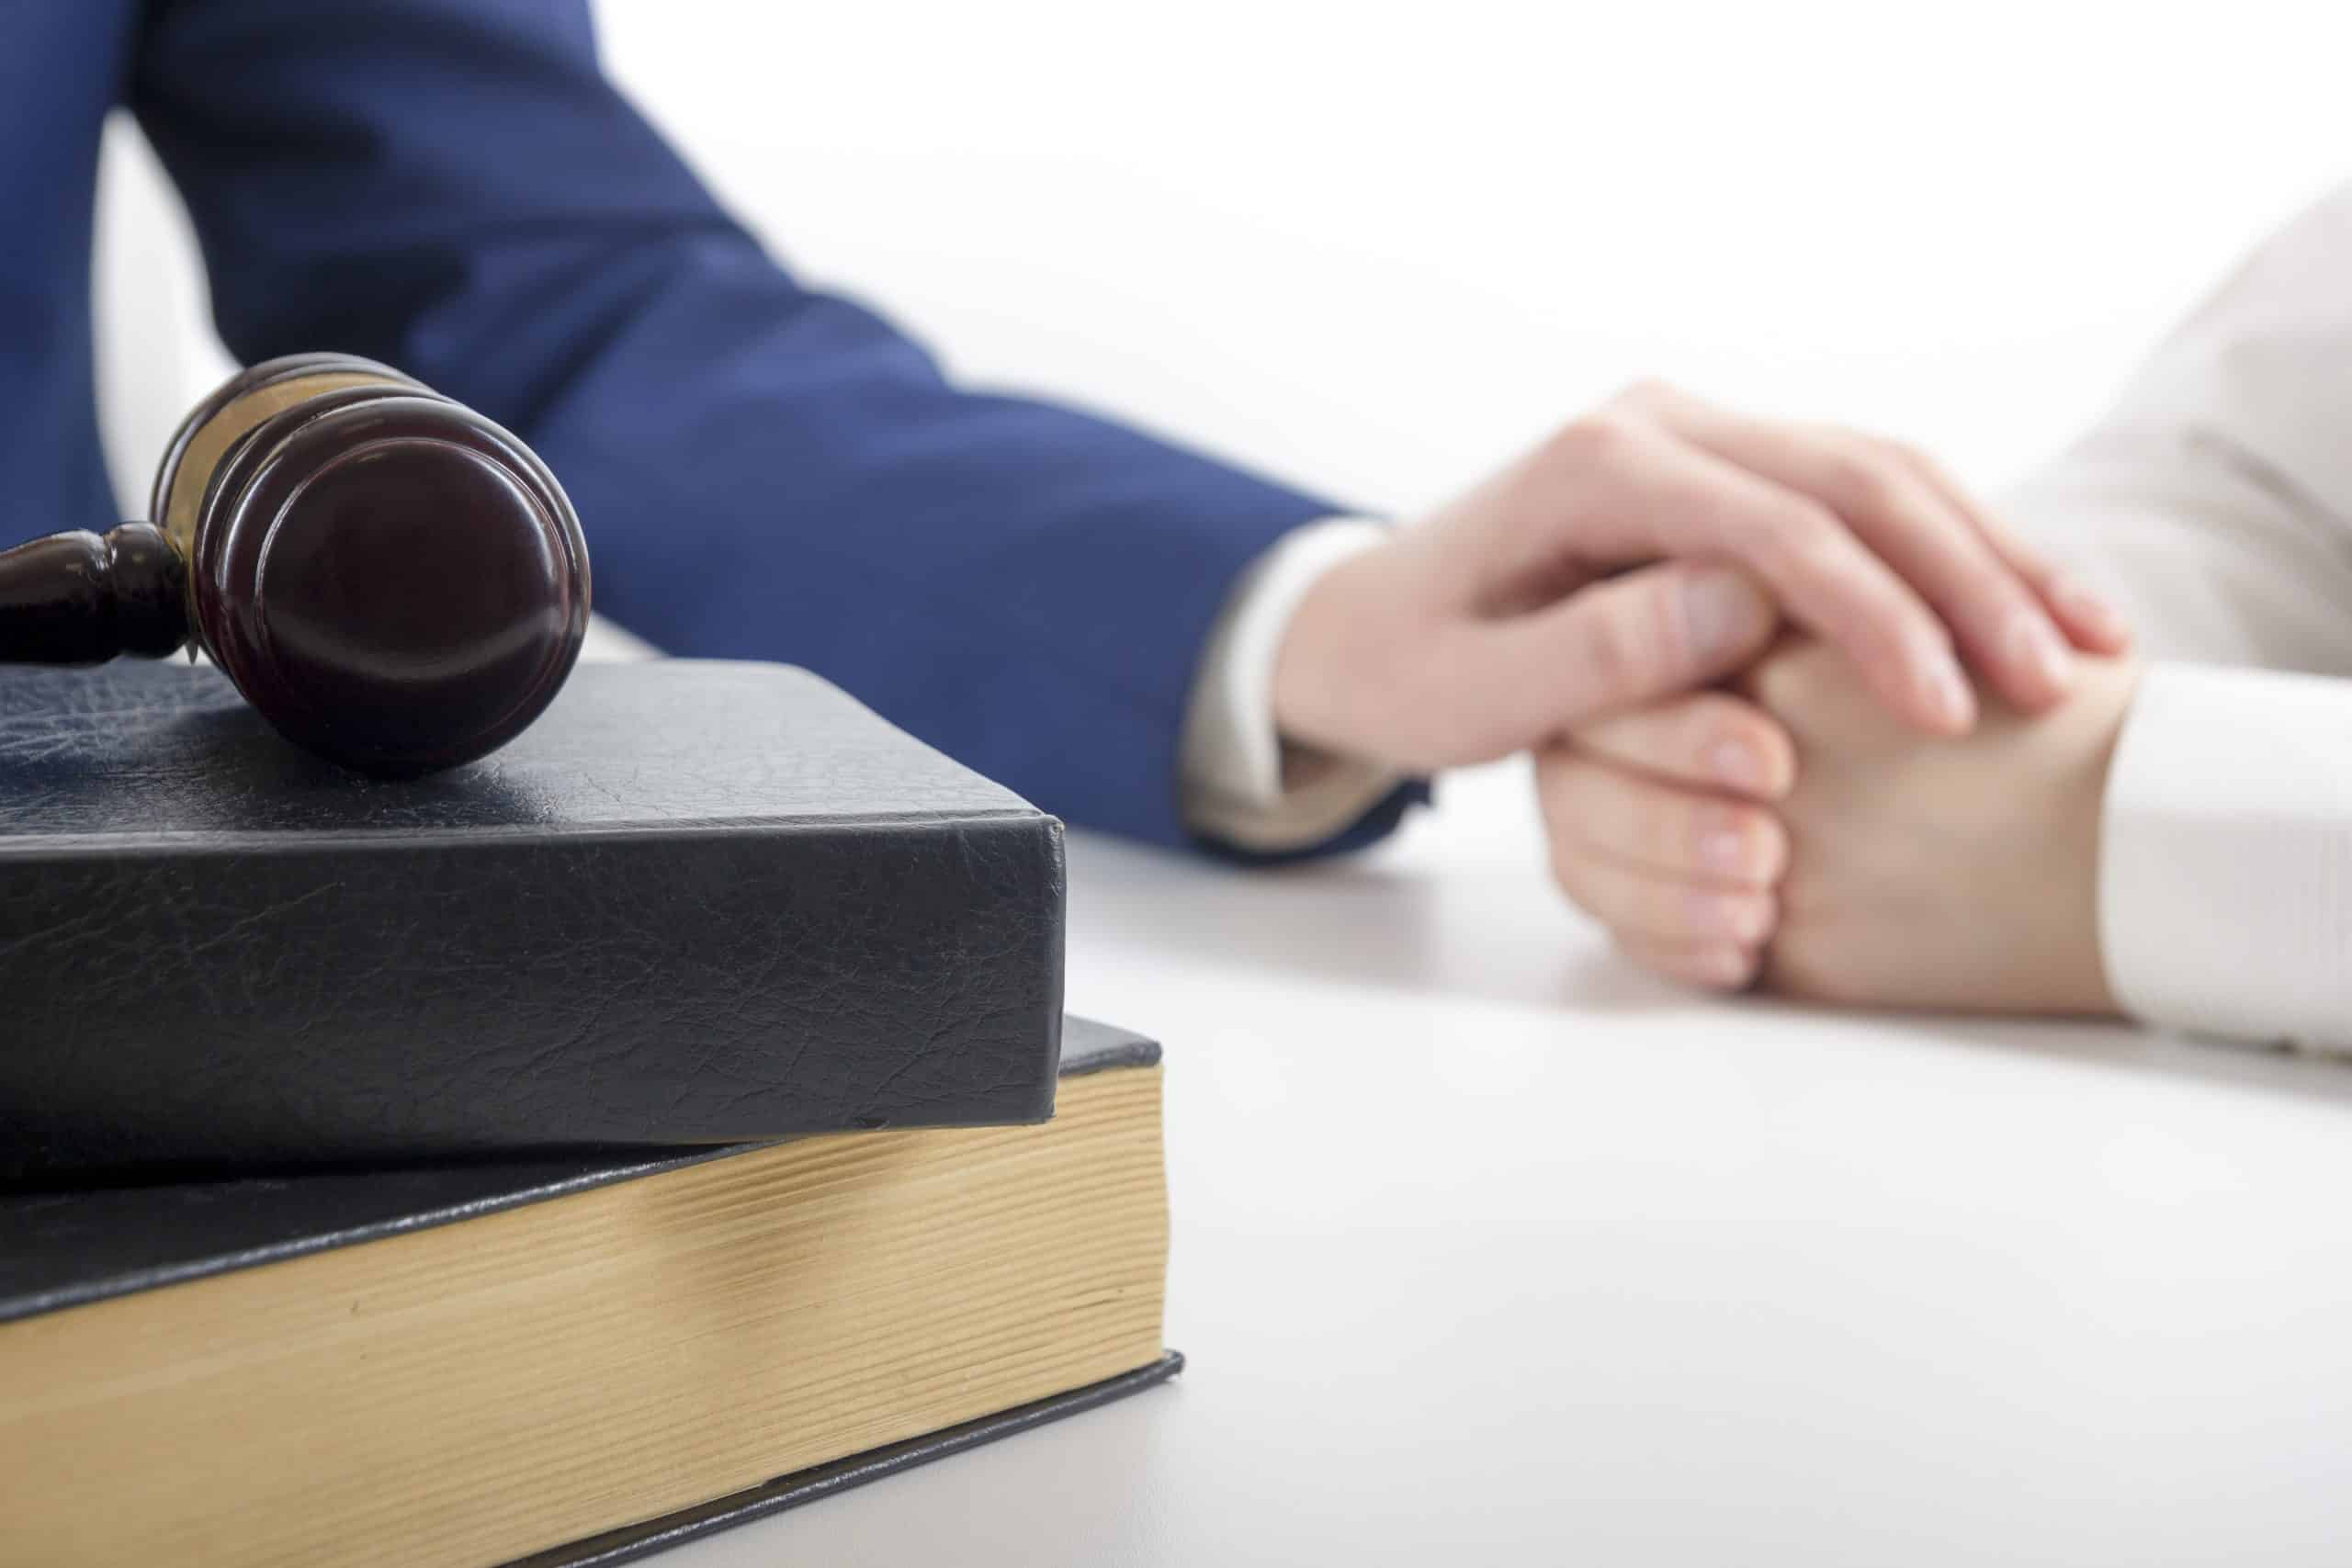 Wrongful death lawyer in Orange Beach puts their hand on their client’s hands to comfort them.